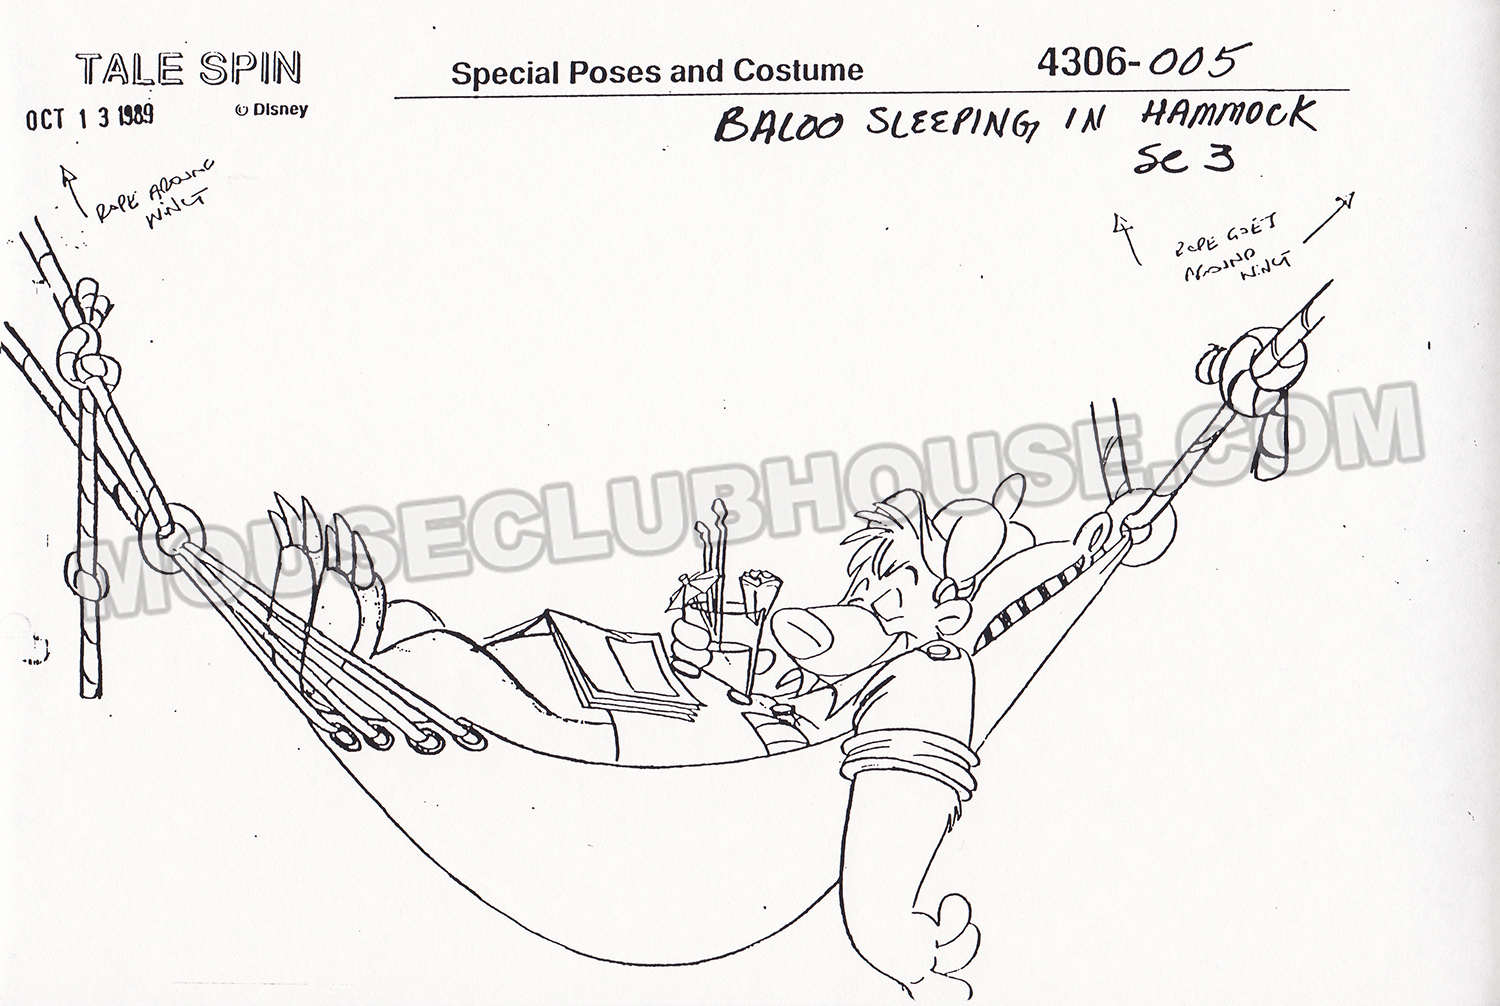 We sometimes had "Special Poses" designed such as Baloo in a hammock